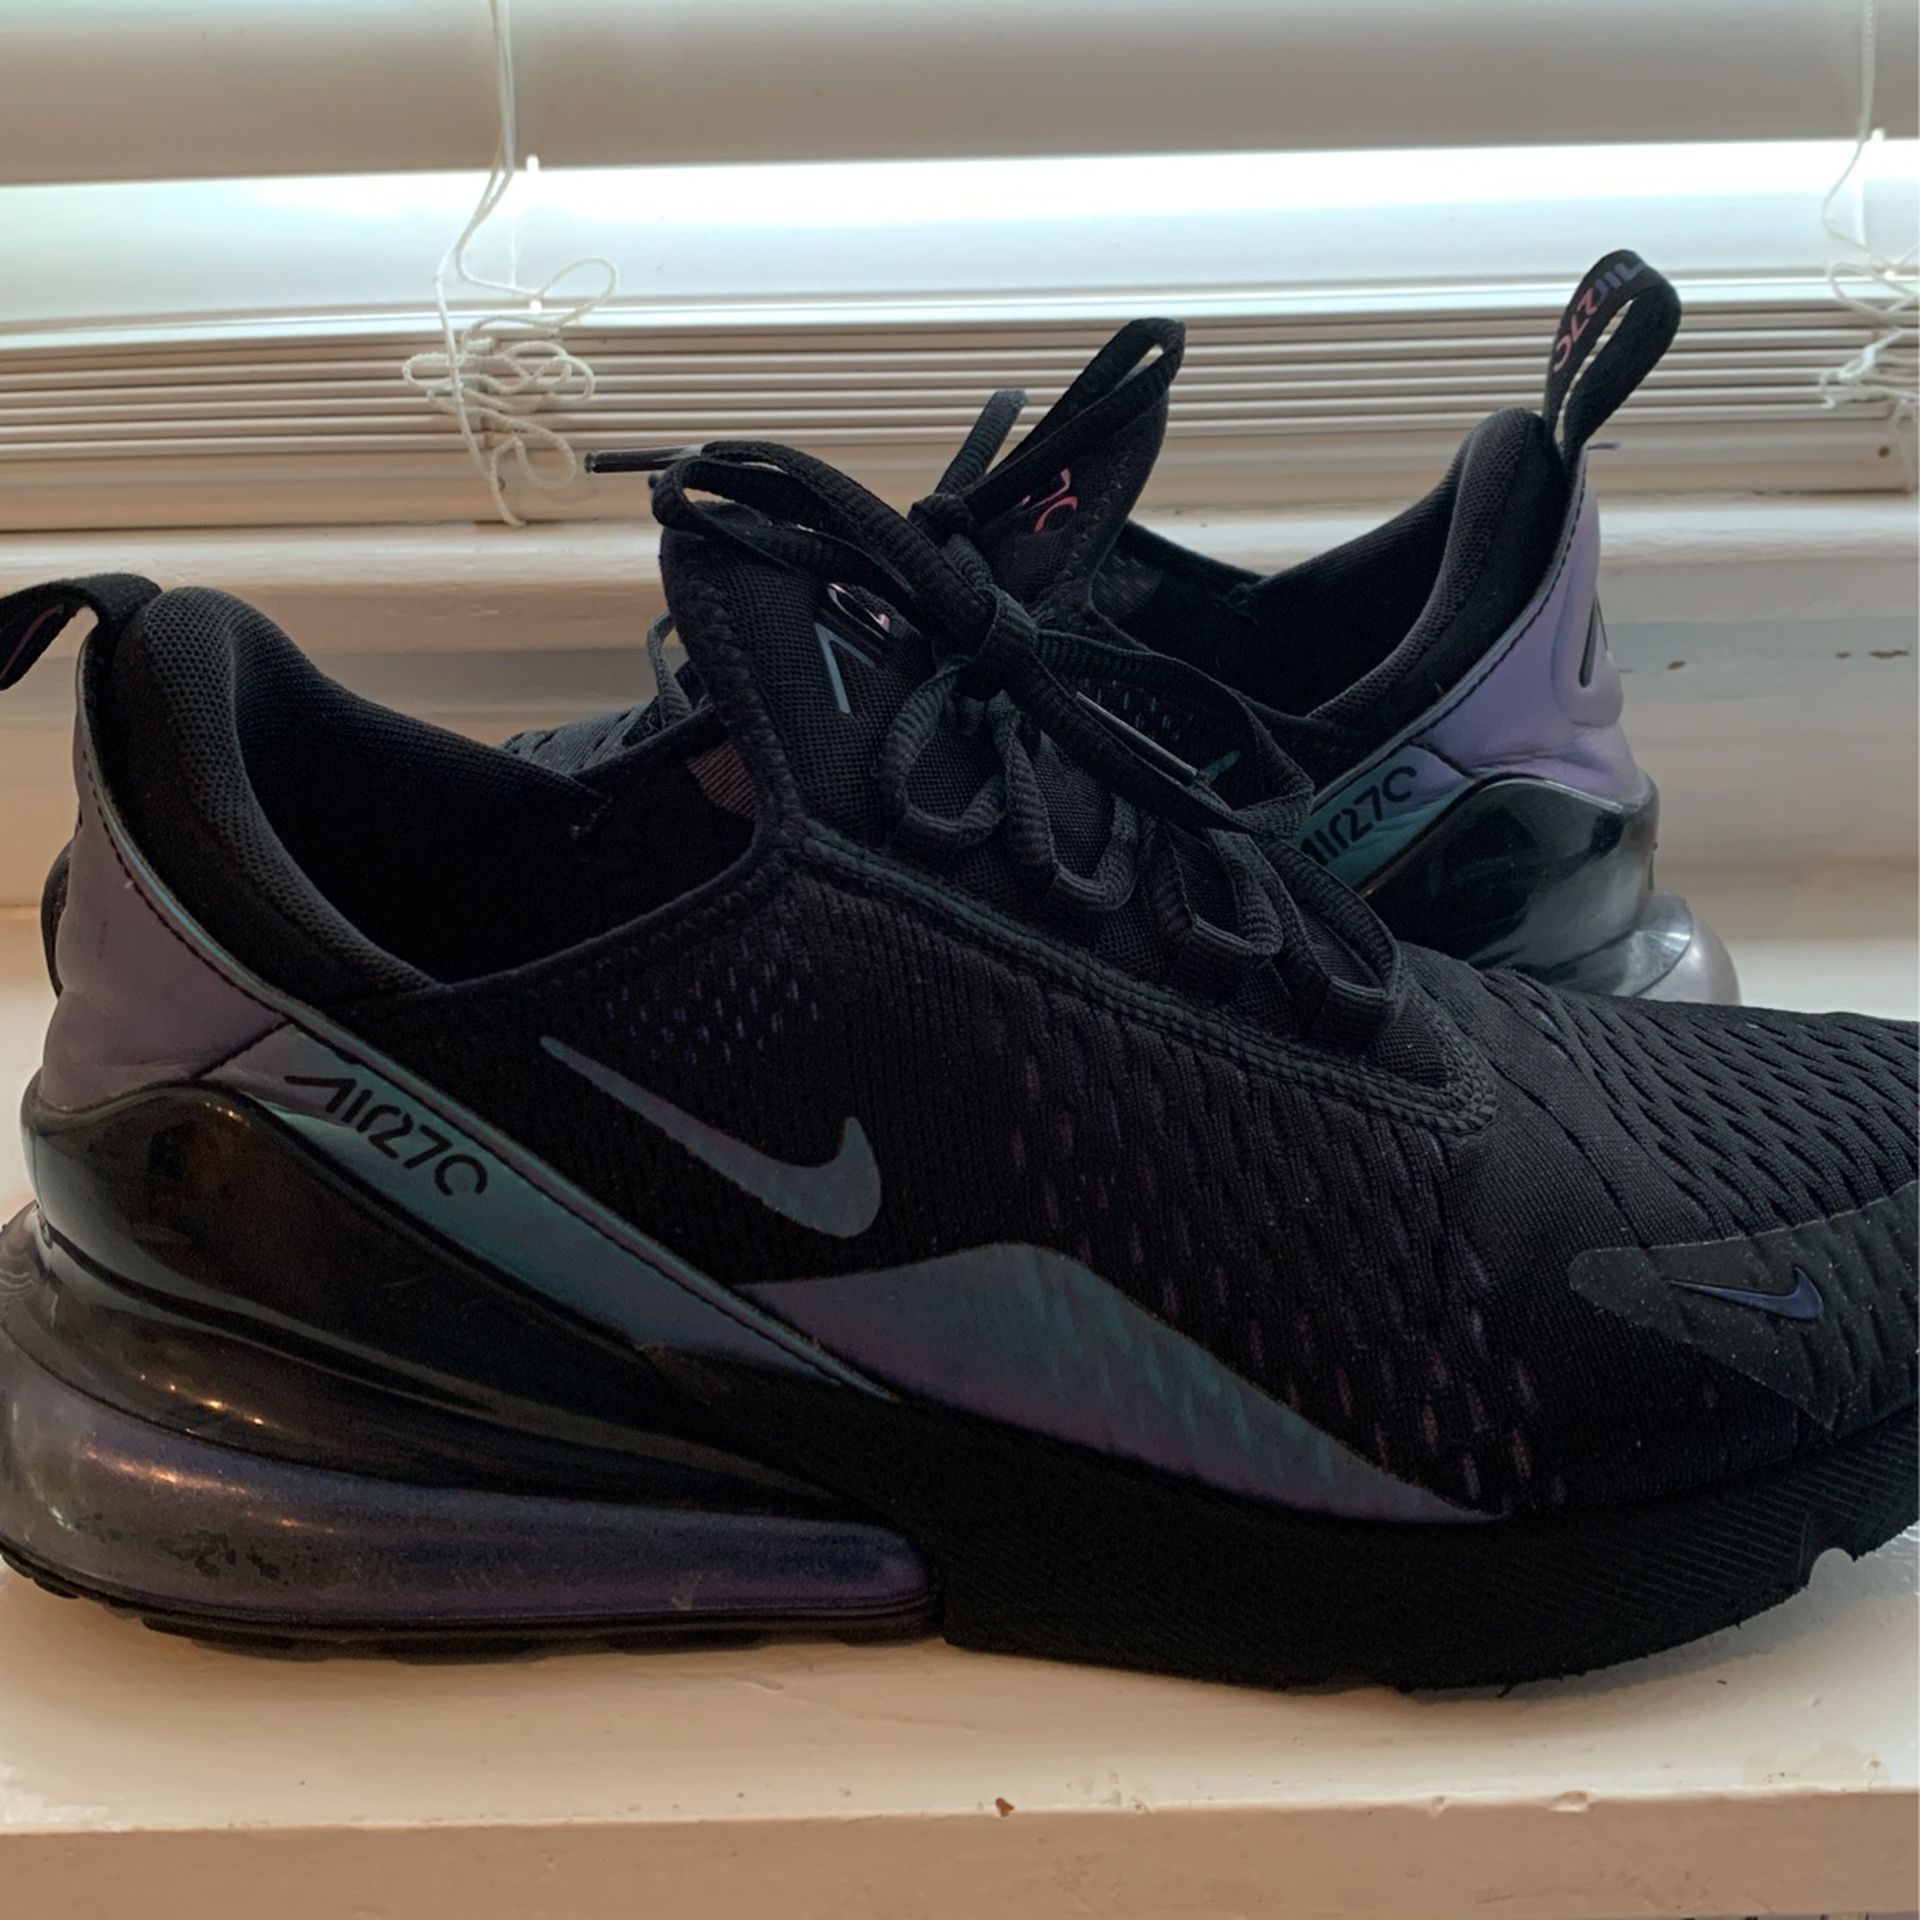 Op maat Moeras Trouw Special Edition Air Max 270 $100 OBO for Sale in Columbia, SC - OfferUp